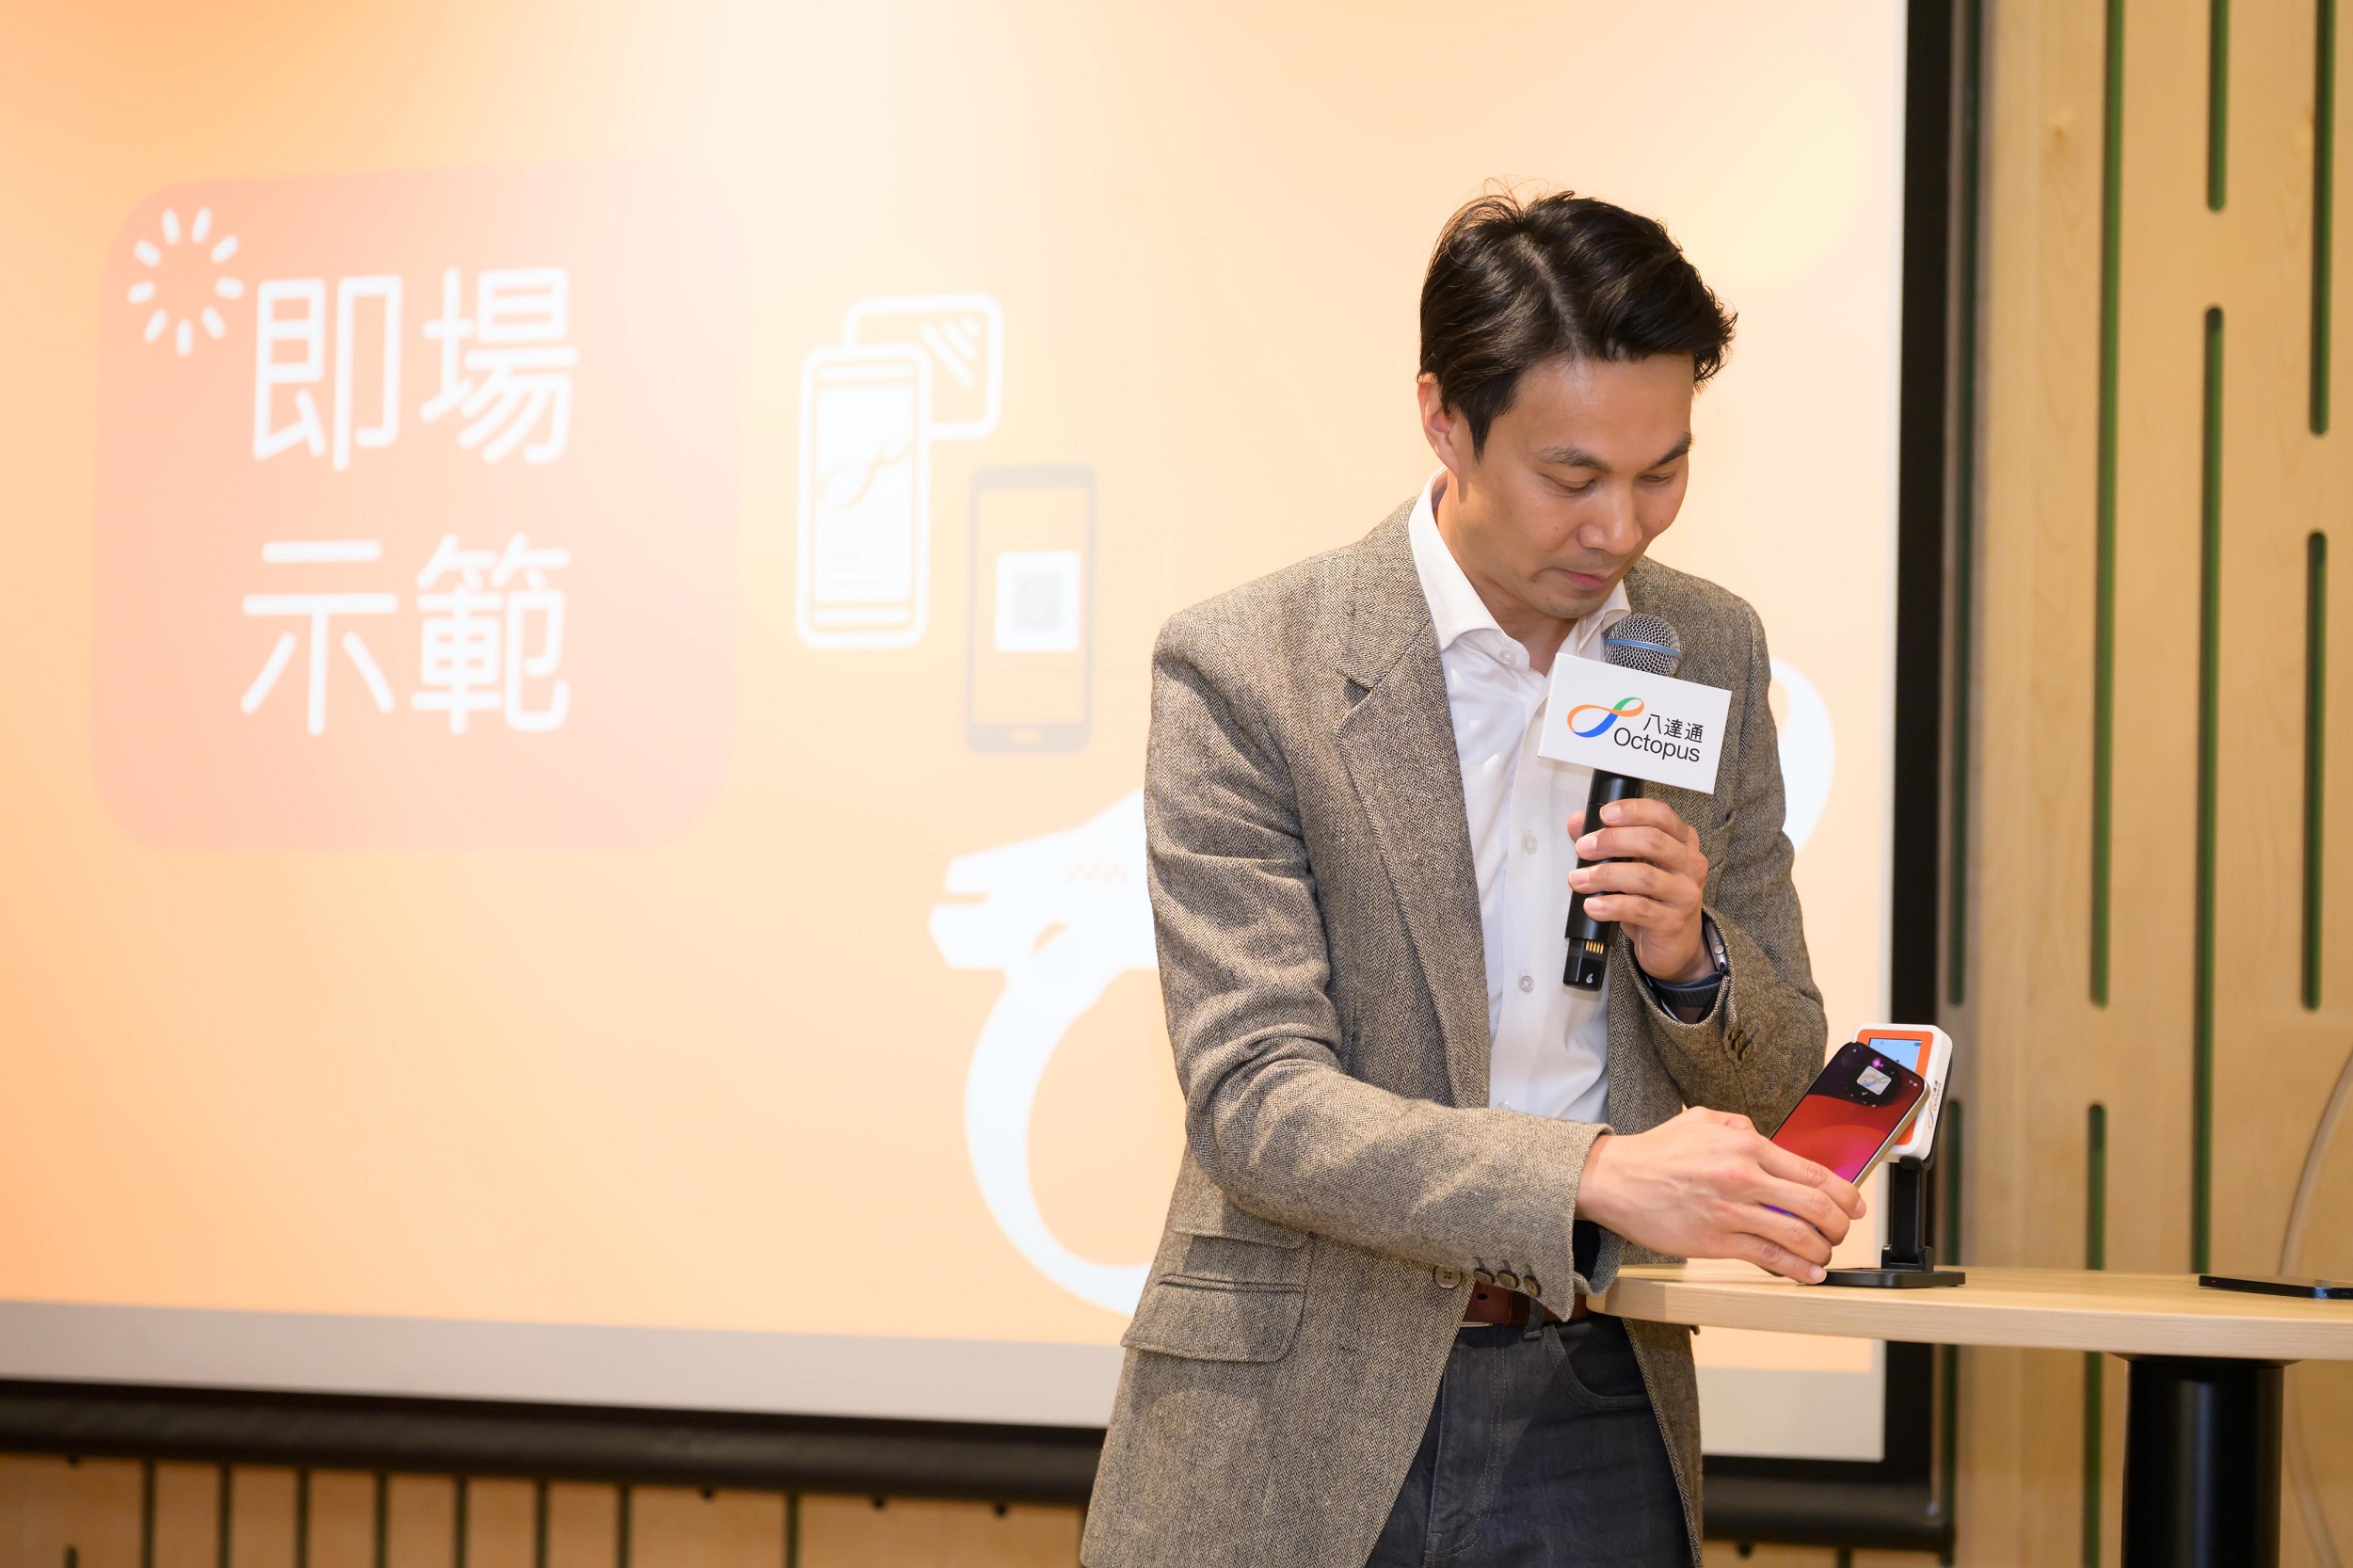 Andy Yip, Product Director, OCL demonstrates how to tap the Octopus card or scan the QR code to pay the taxi fare.